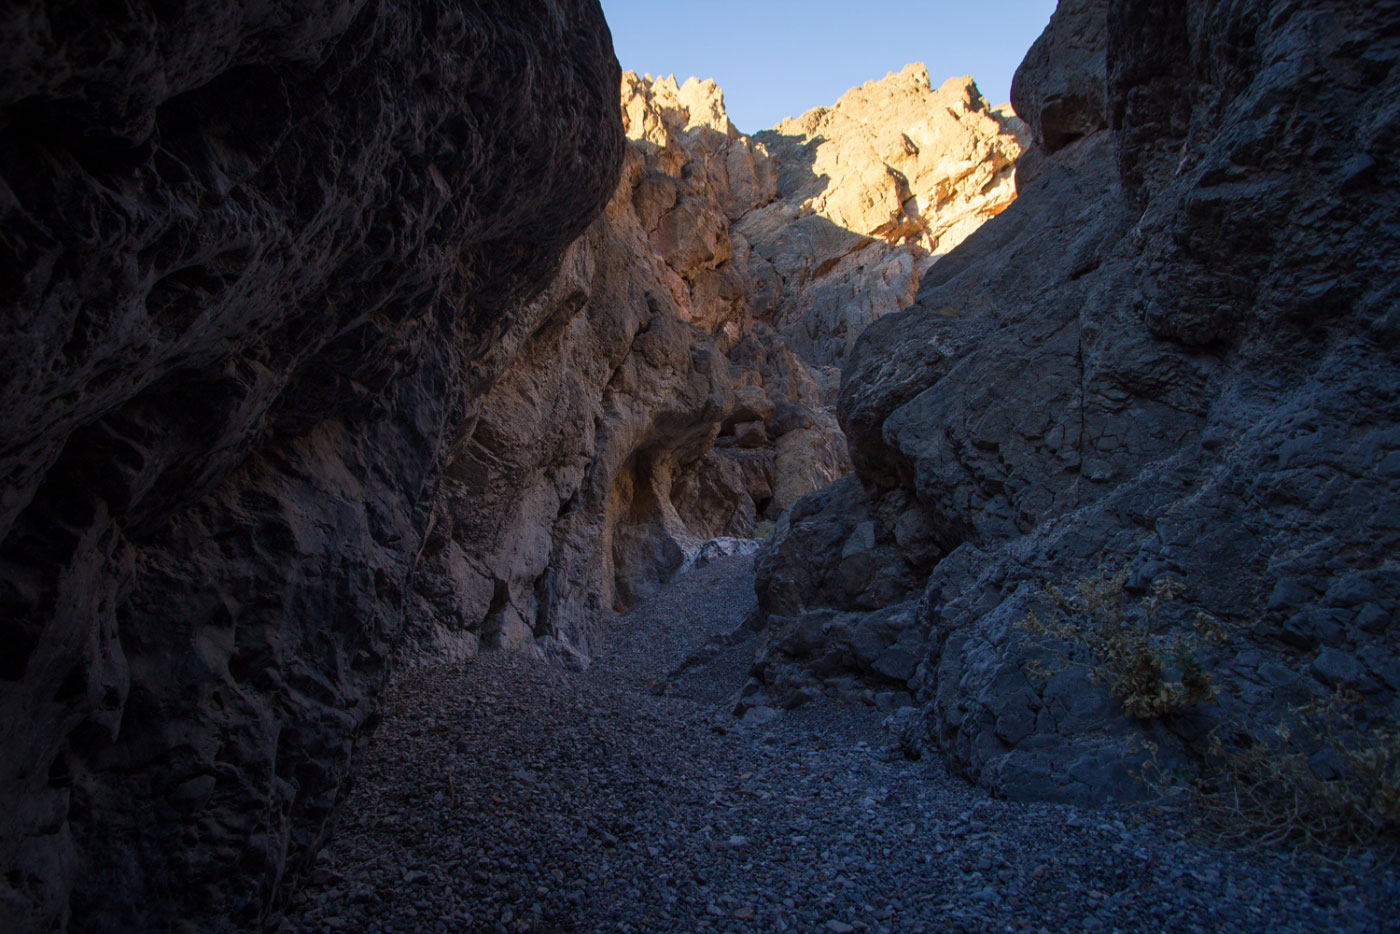 Hike Palmer Canyon Narrows via The Badlands in Death Valley National Park, California - Stav is Lost